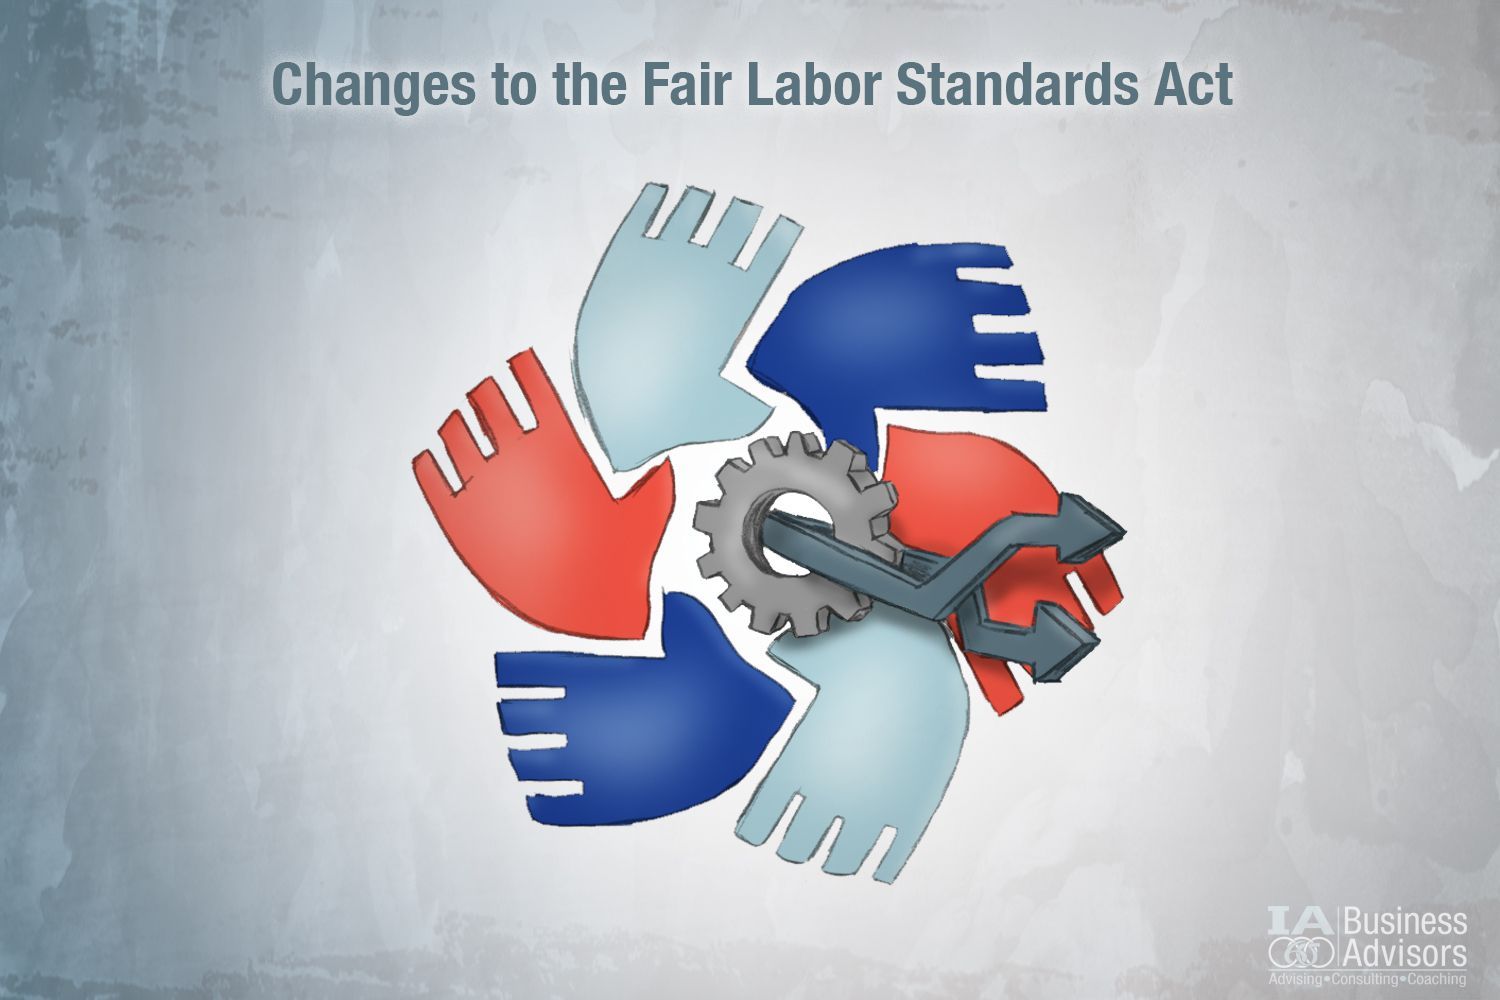 Changes to the Fair Labor Standards Act